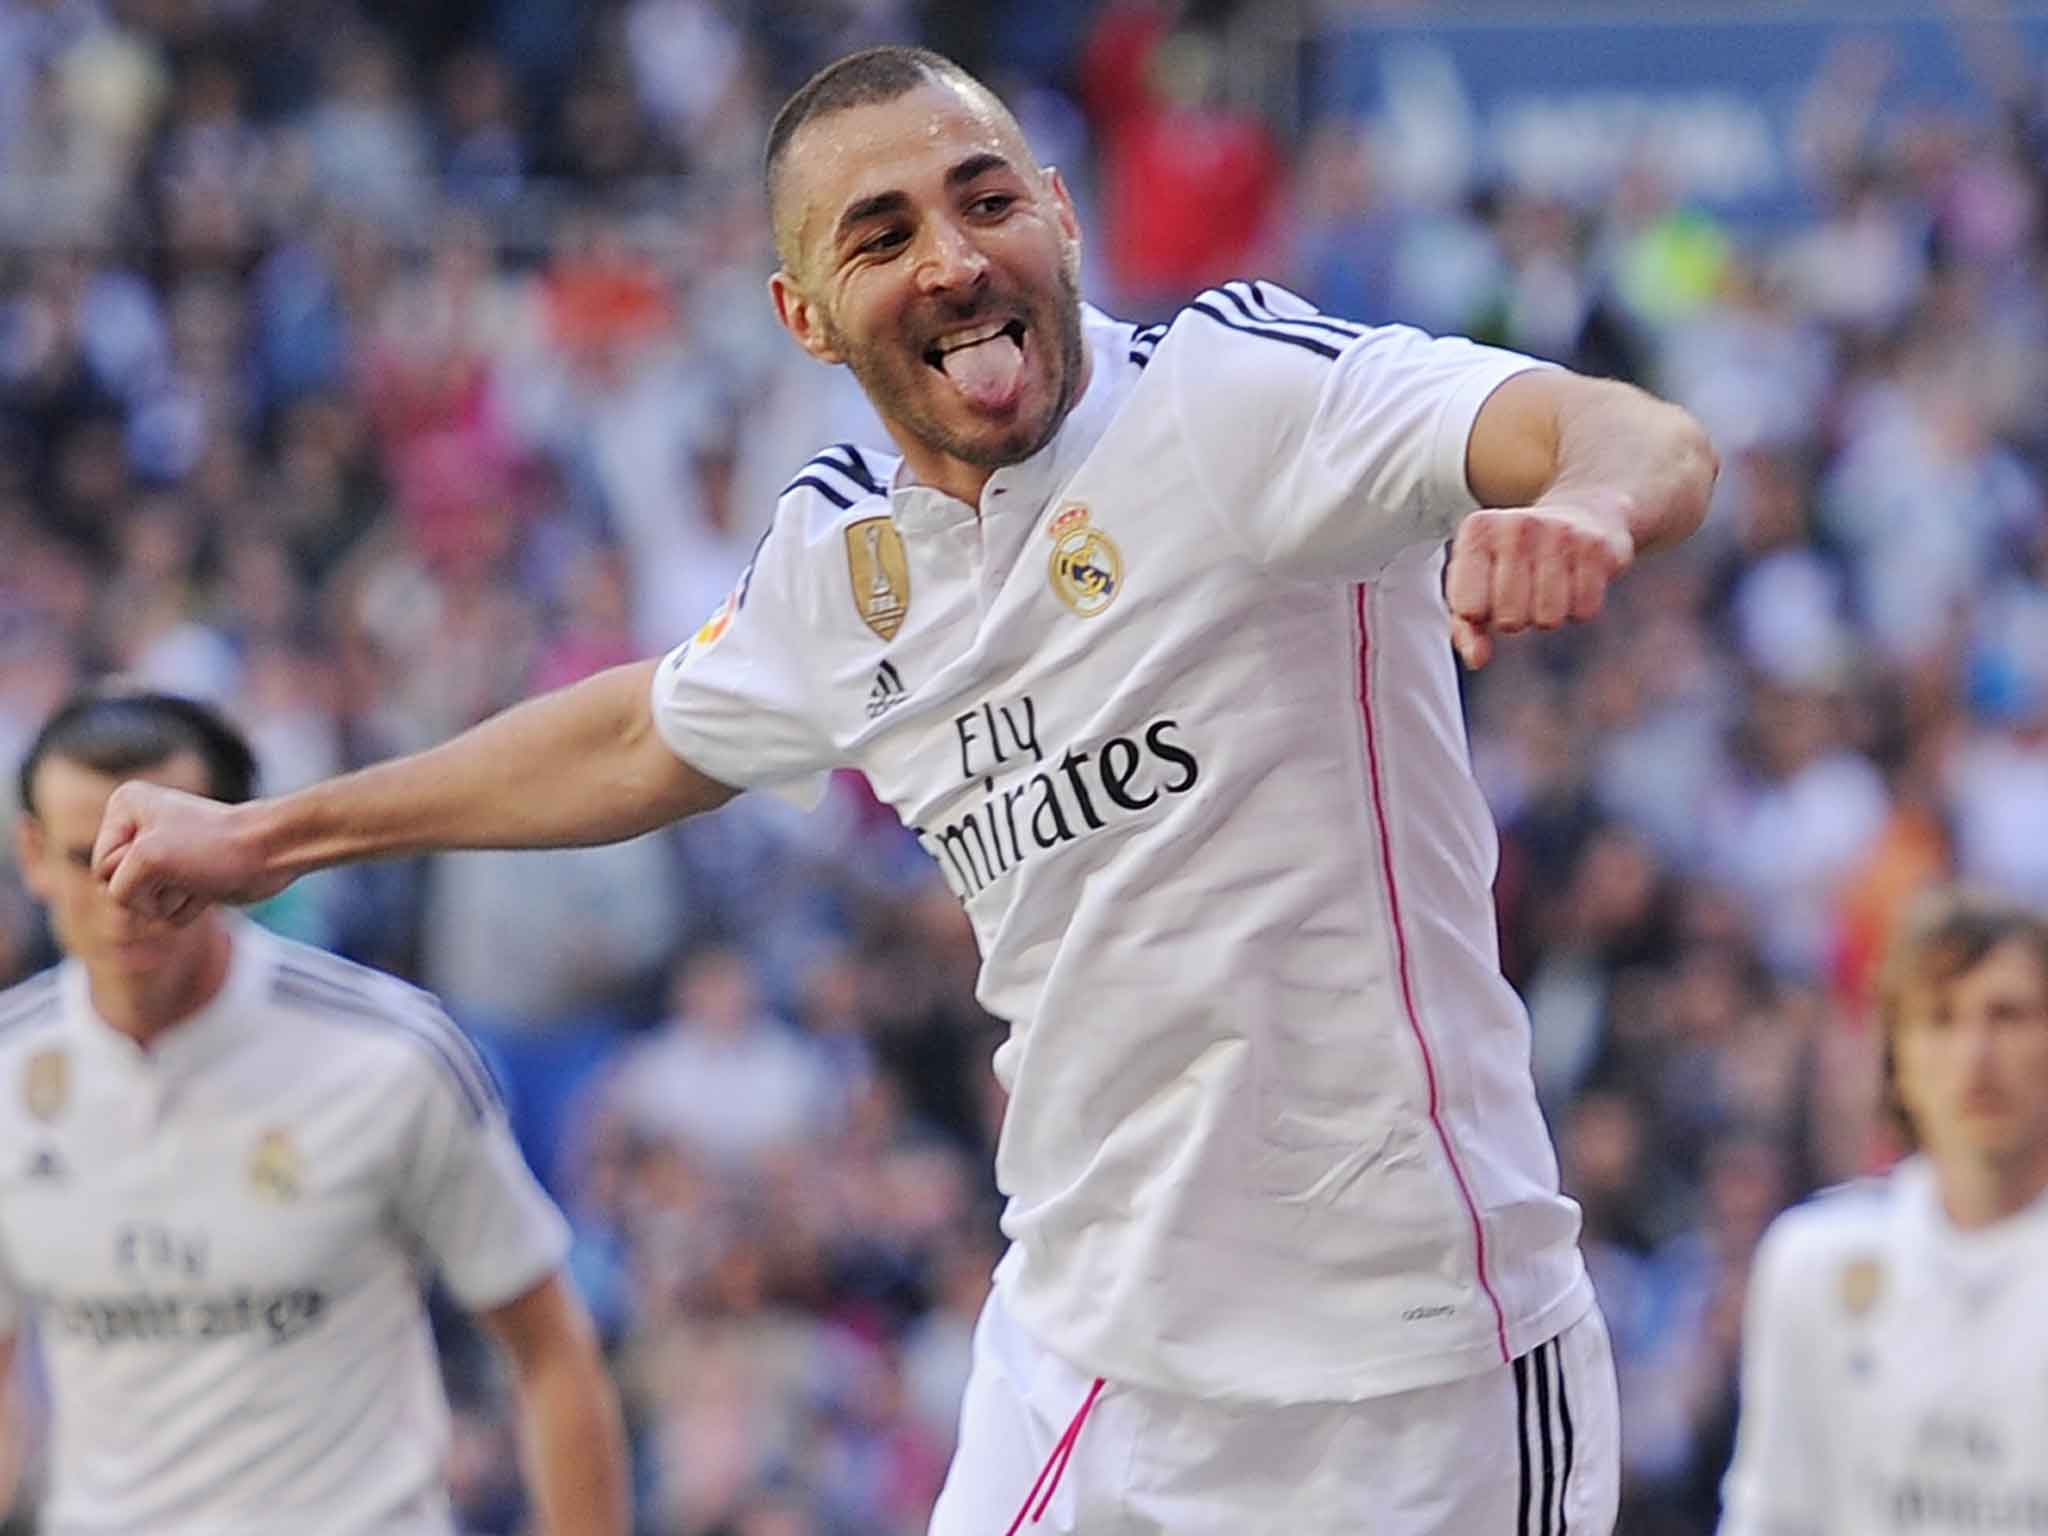 Real Madrid striker Karim Benzema could be a transfer target for Manchester United